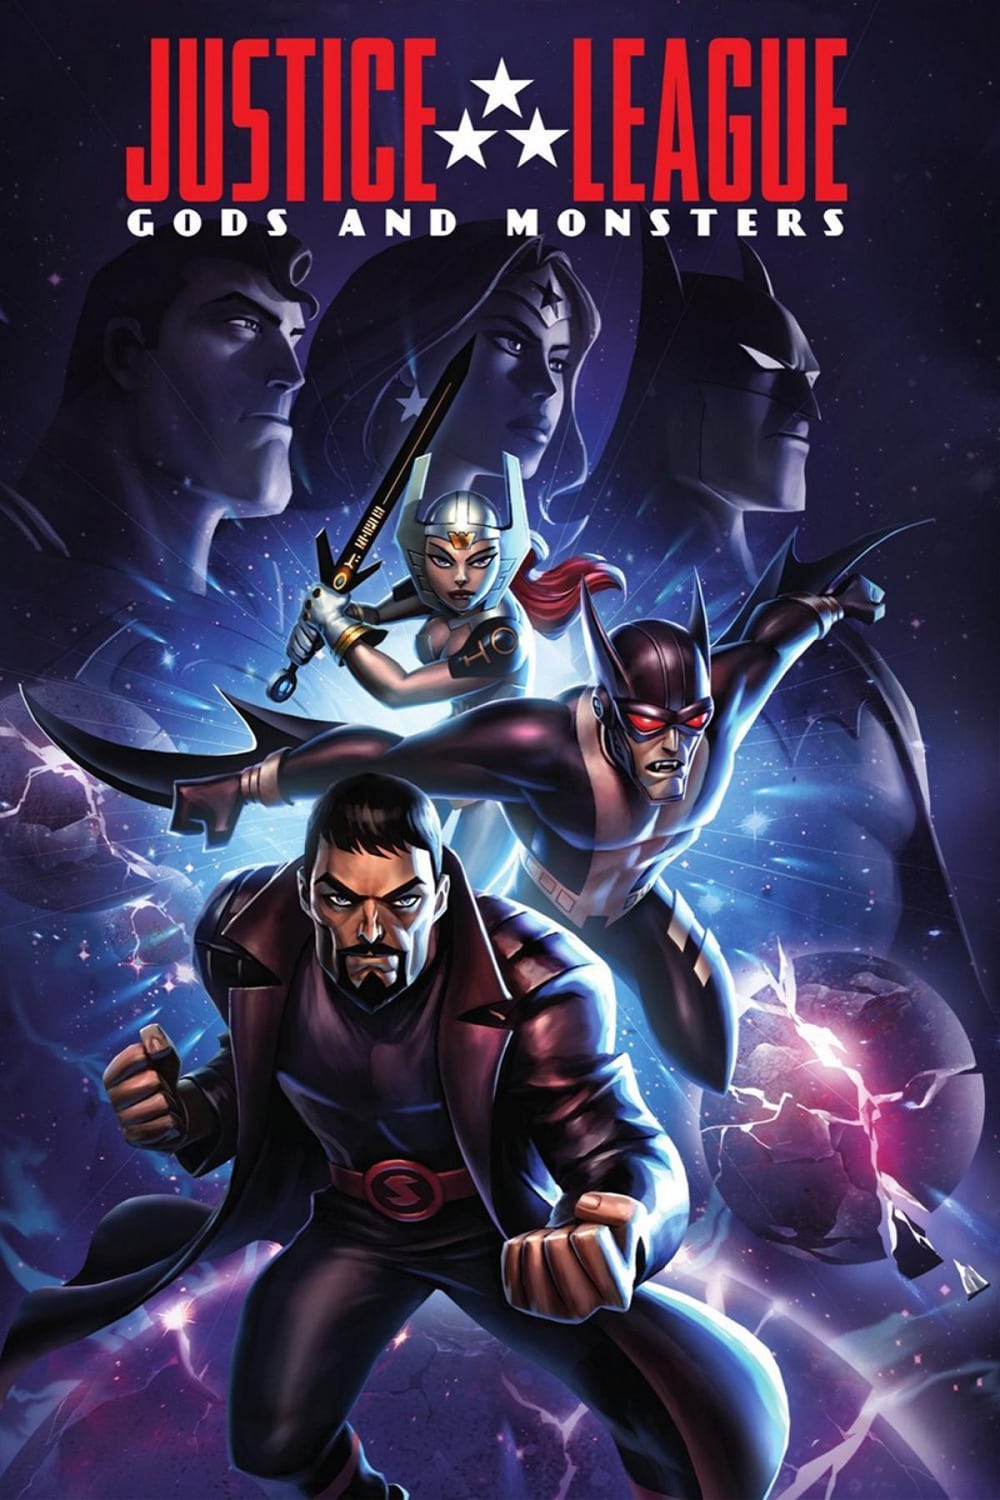 Justice League: Gods and Monsters film